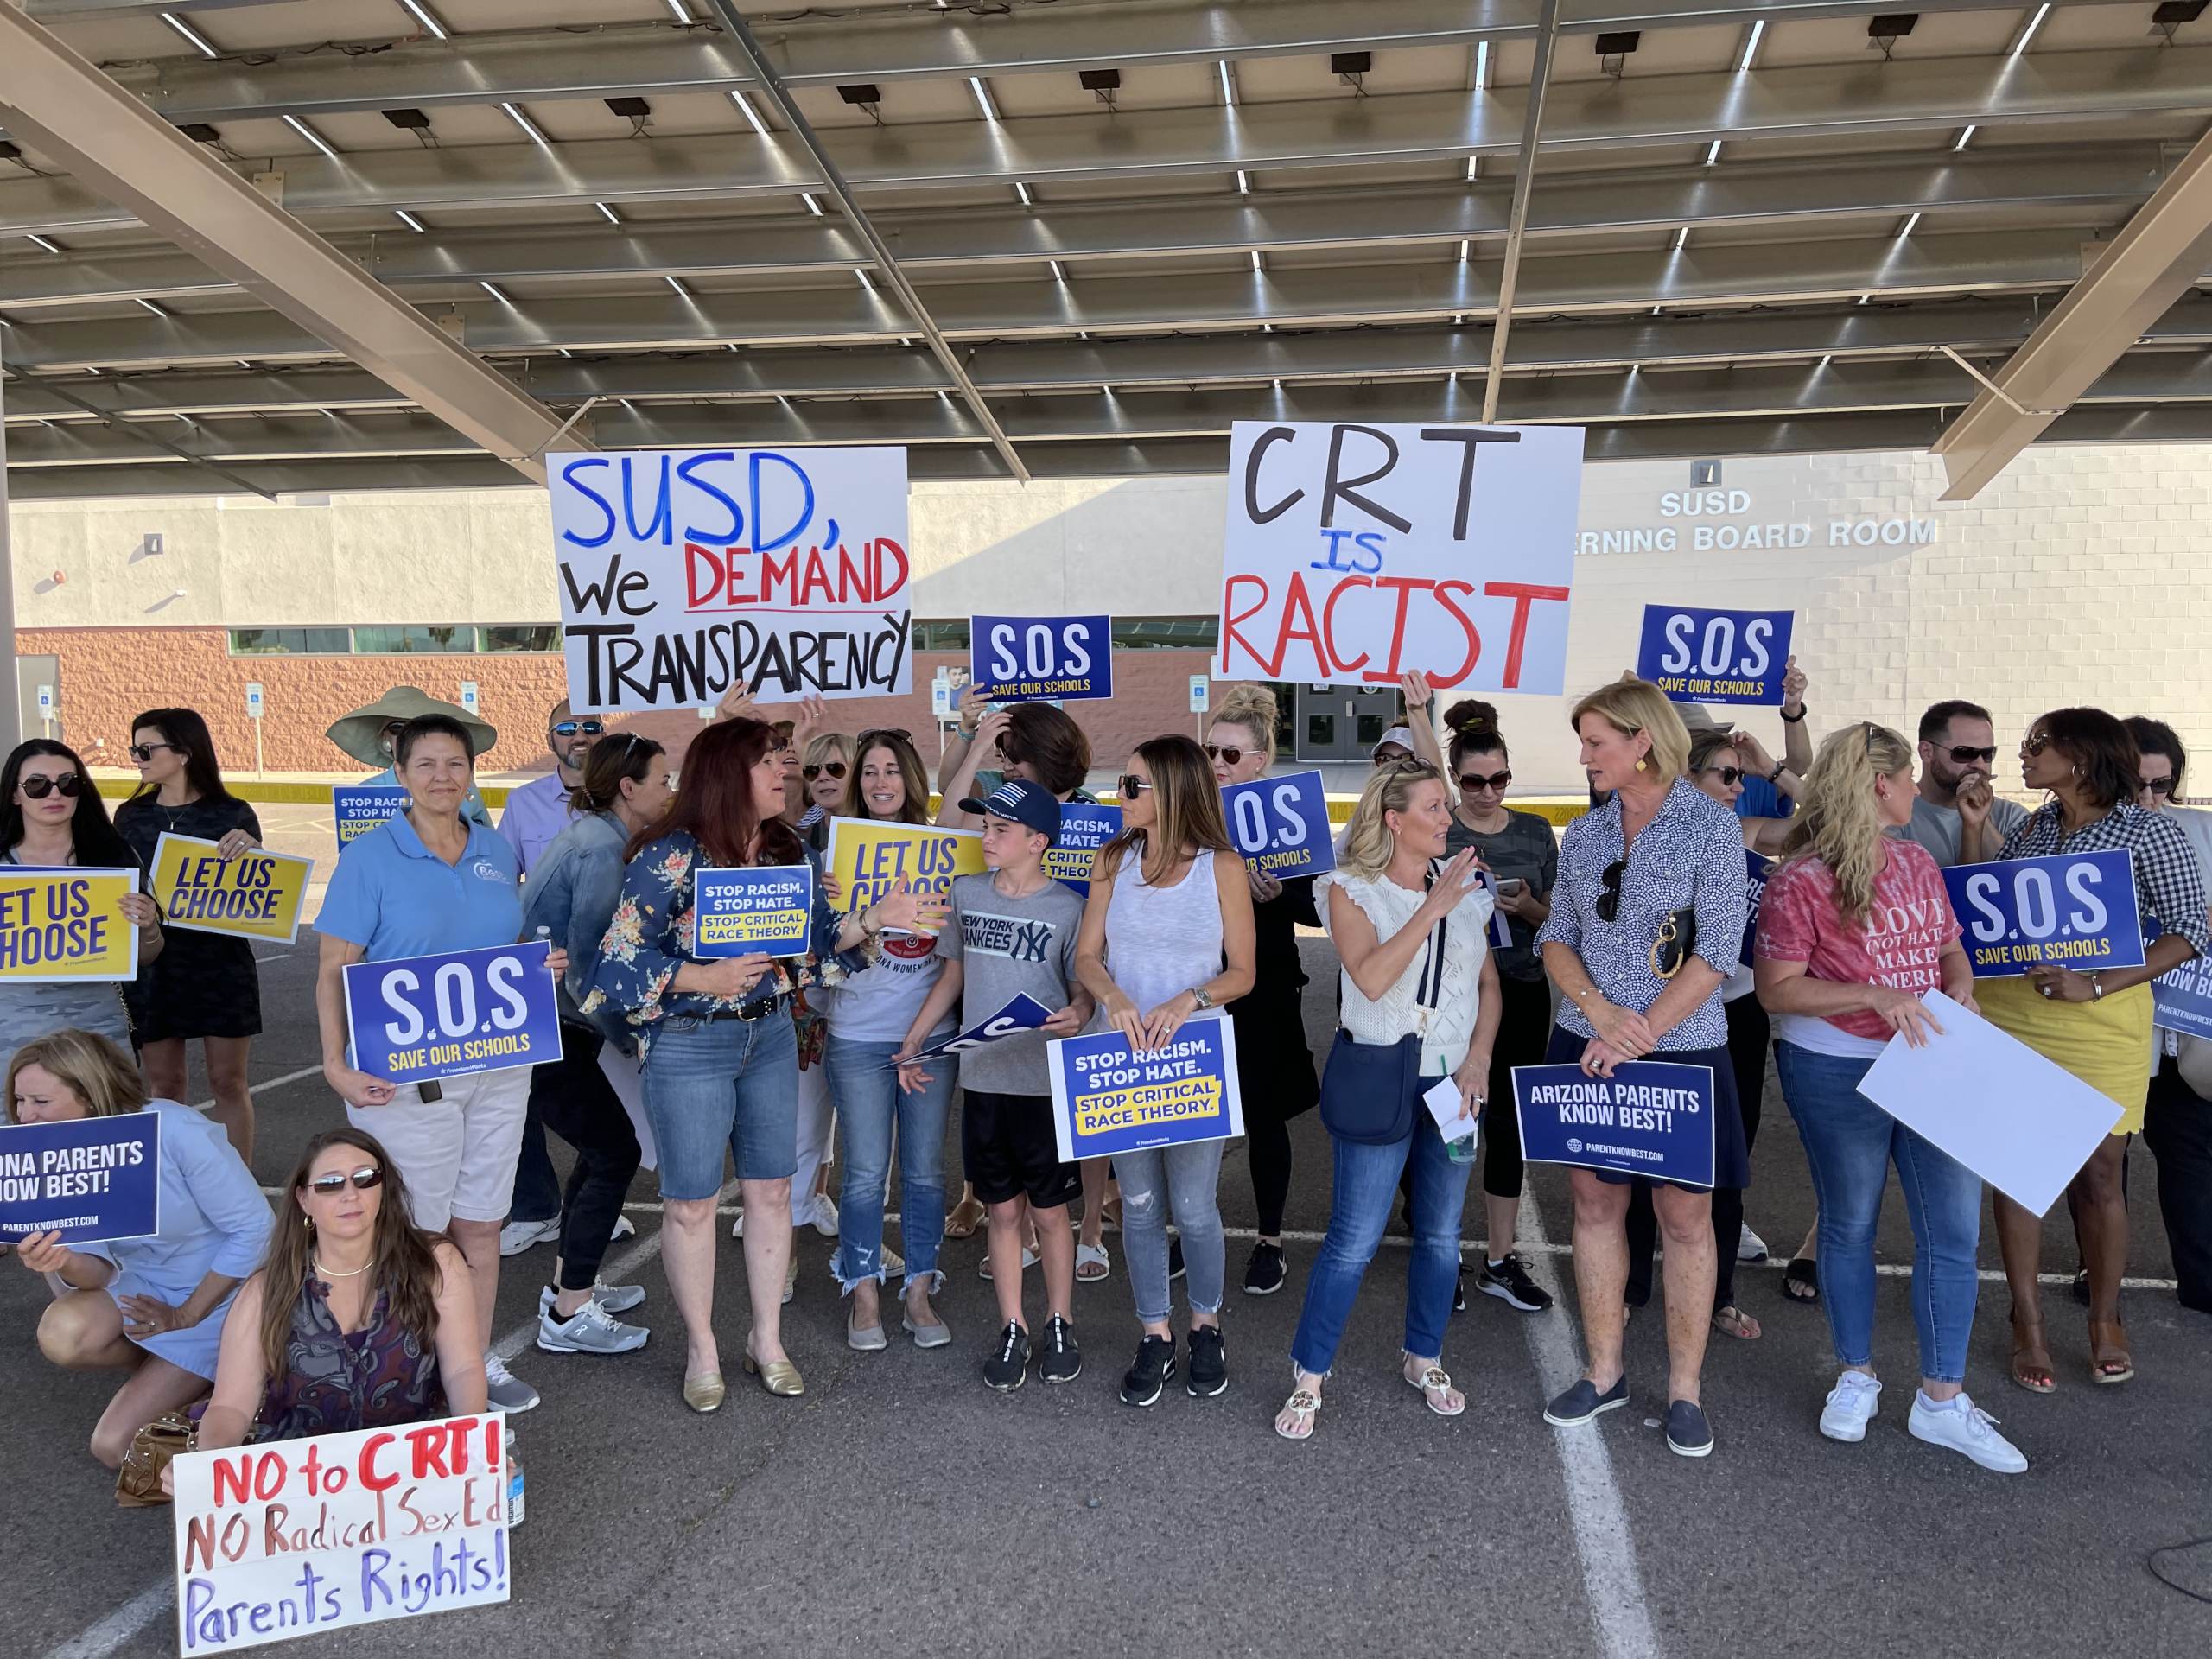 SCHOOL PARENTS HOLD MASS RALLY in Scottsdale, Arizona – Announce Coalition to Recruit, Train and Mobilize Parent Activists – While School Board Hides (VIDEO)